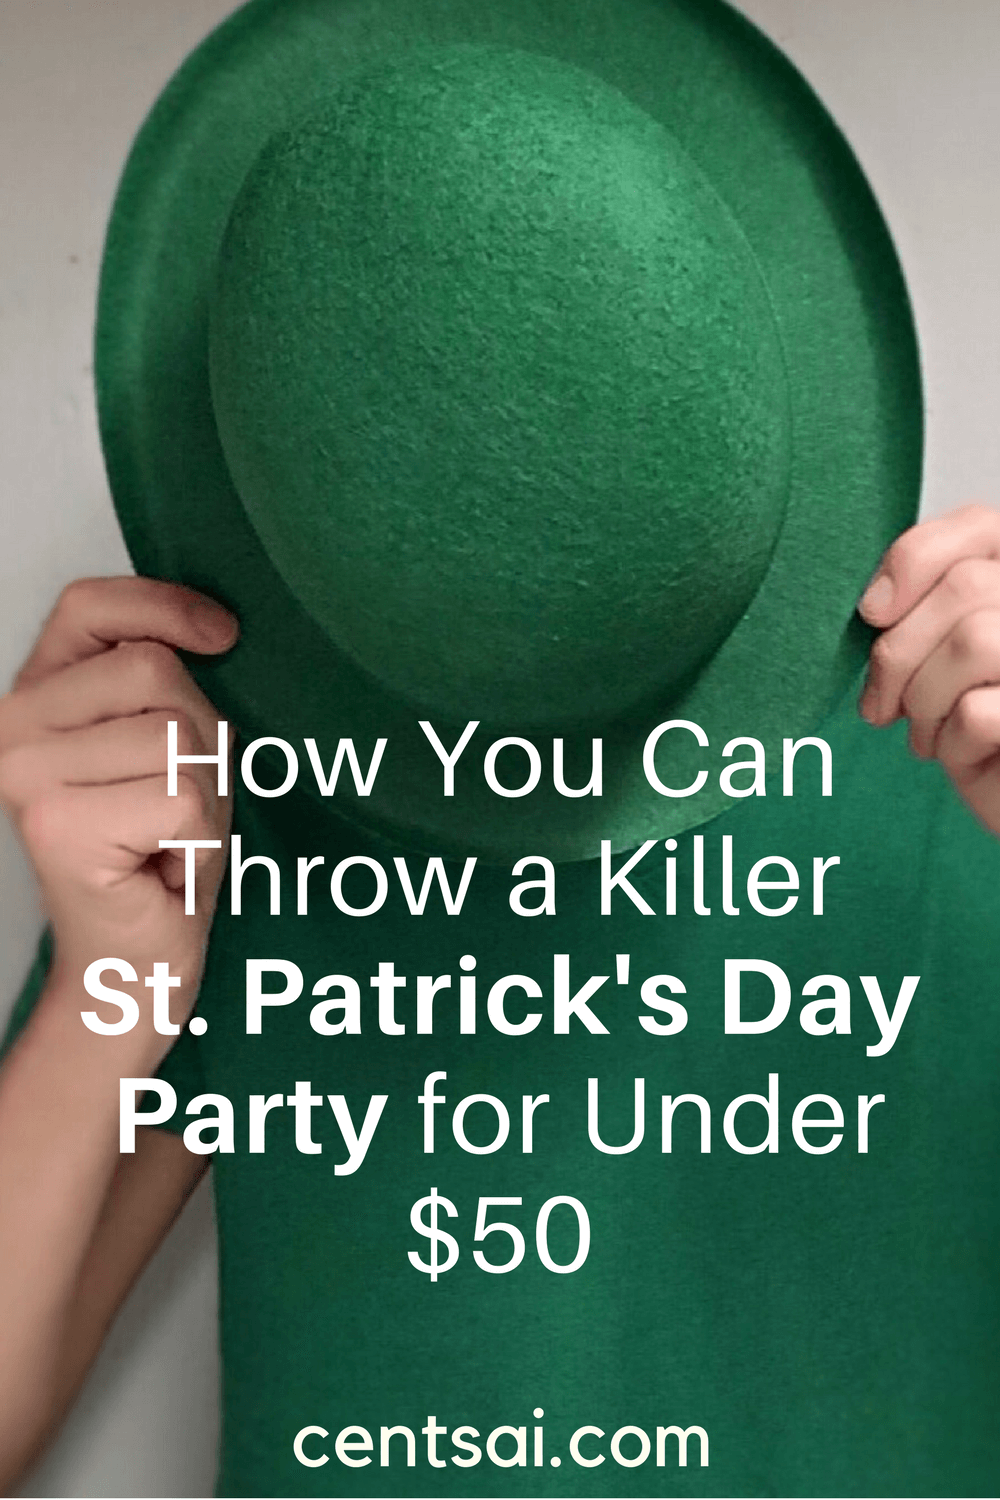 How You Can Throw a Killer St. Patrick's Day Party for Under $50